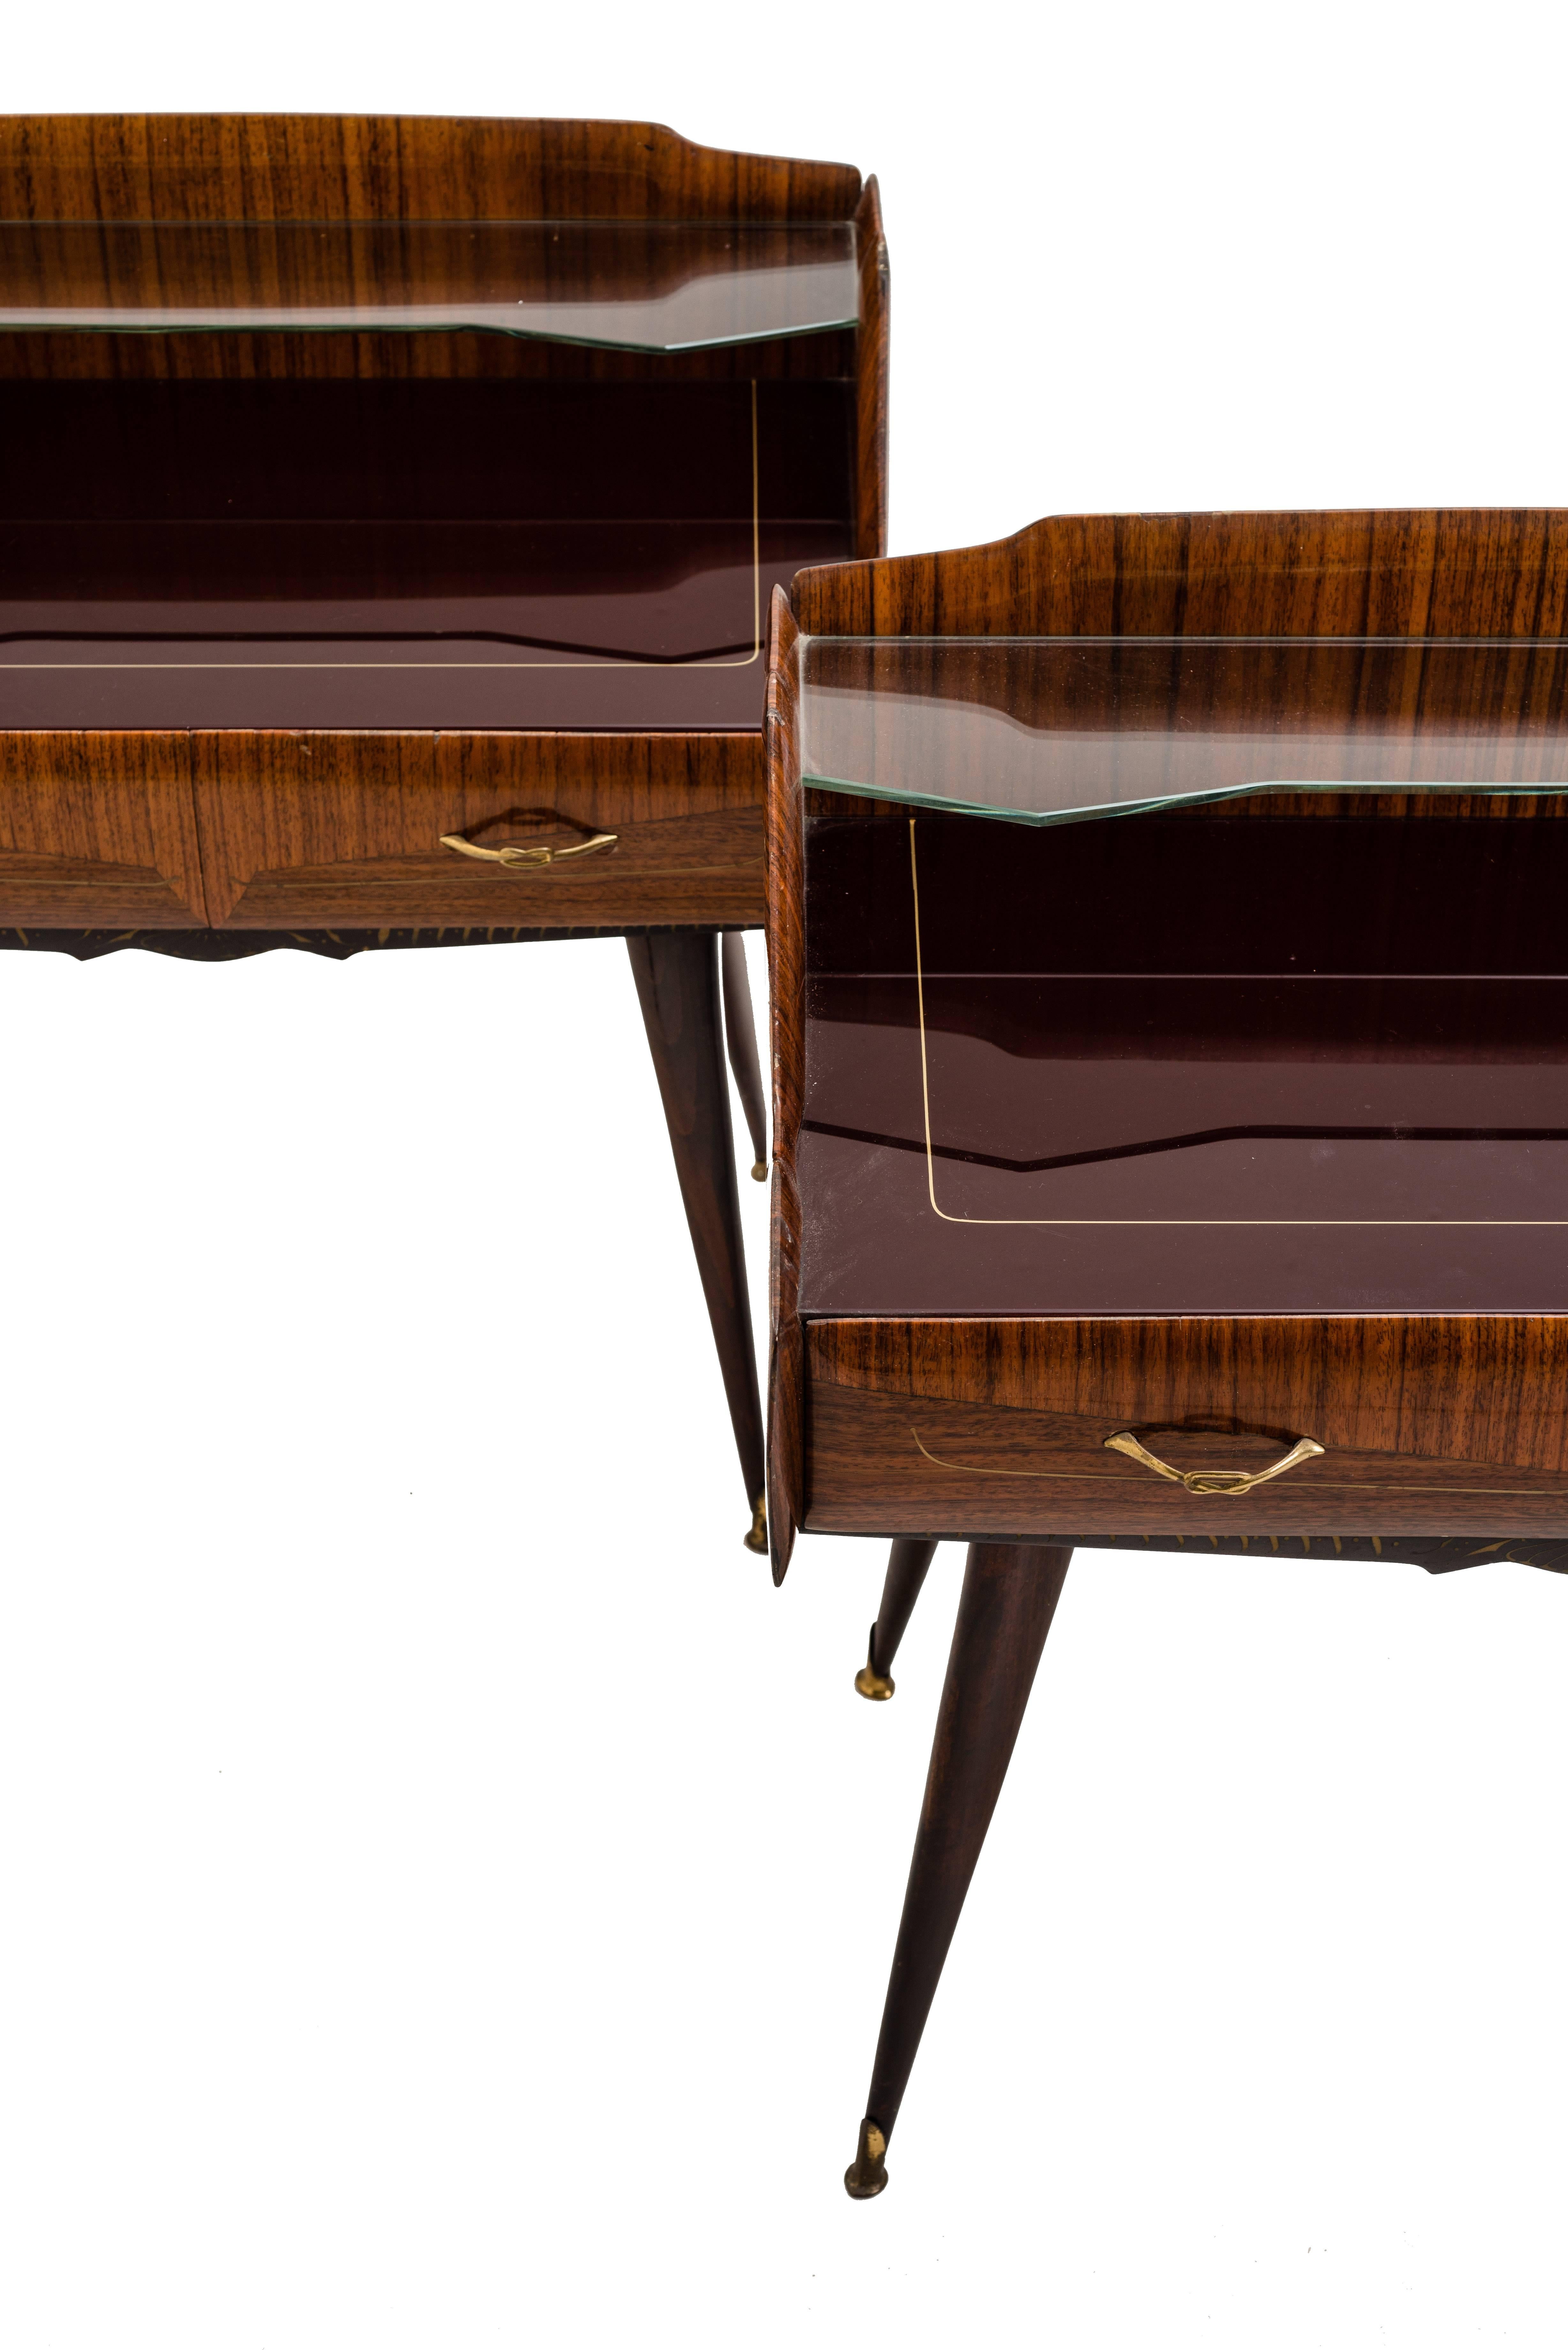 Pair of remarkable bedsides rosewood in the style of Paolo Buffa, 1950s.

The same set includes the dressing table with the mirror, but the two nightstands are also sold individually.